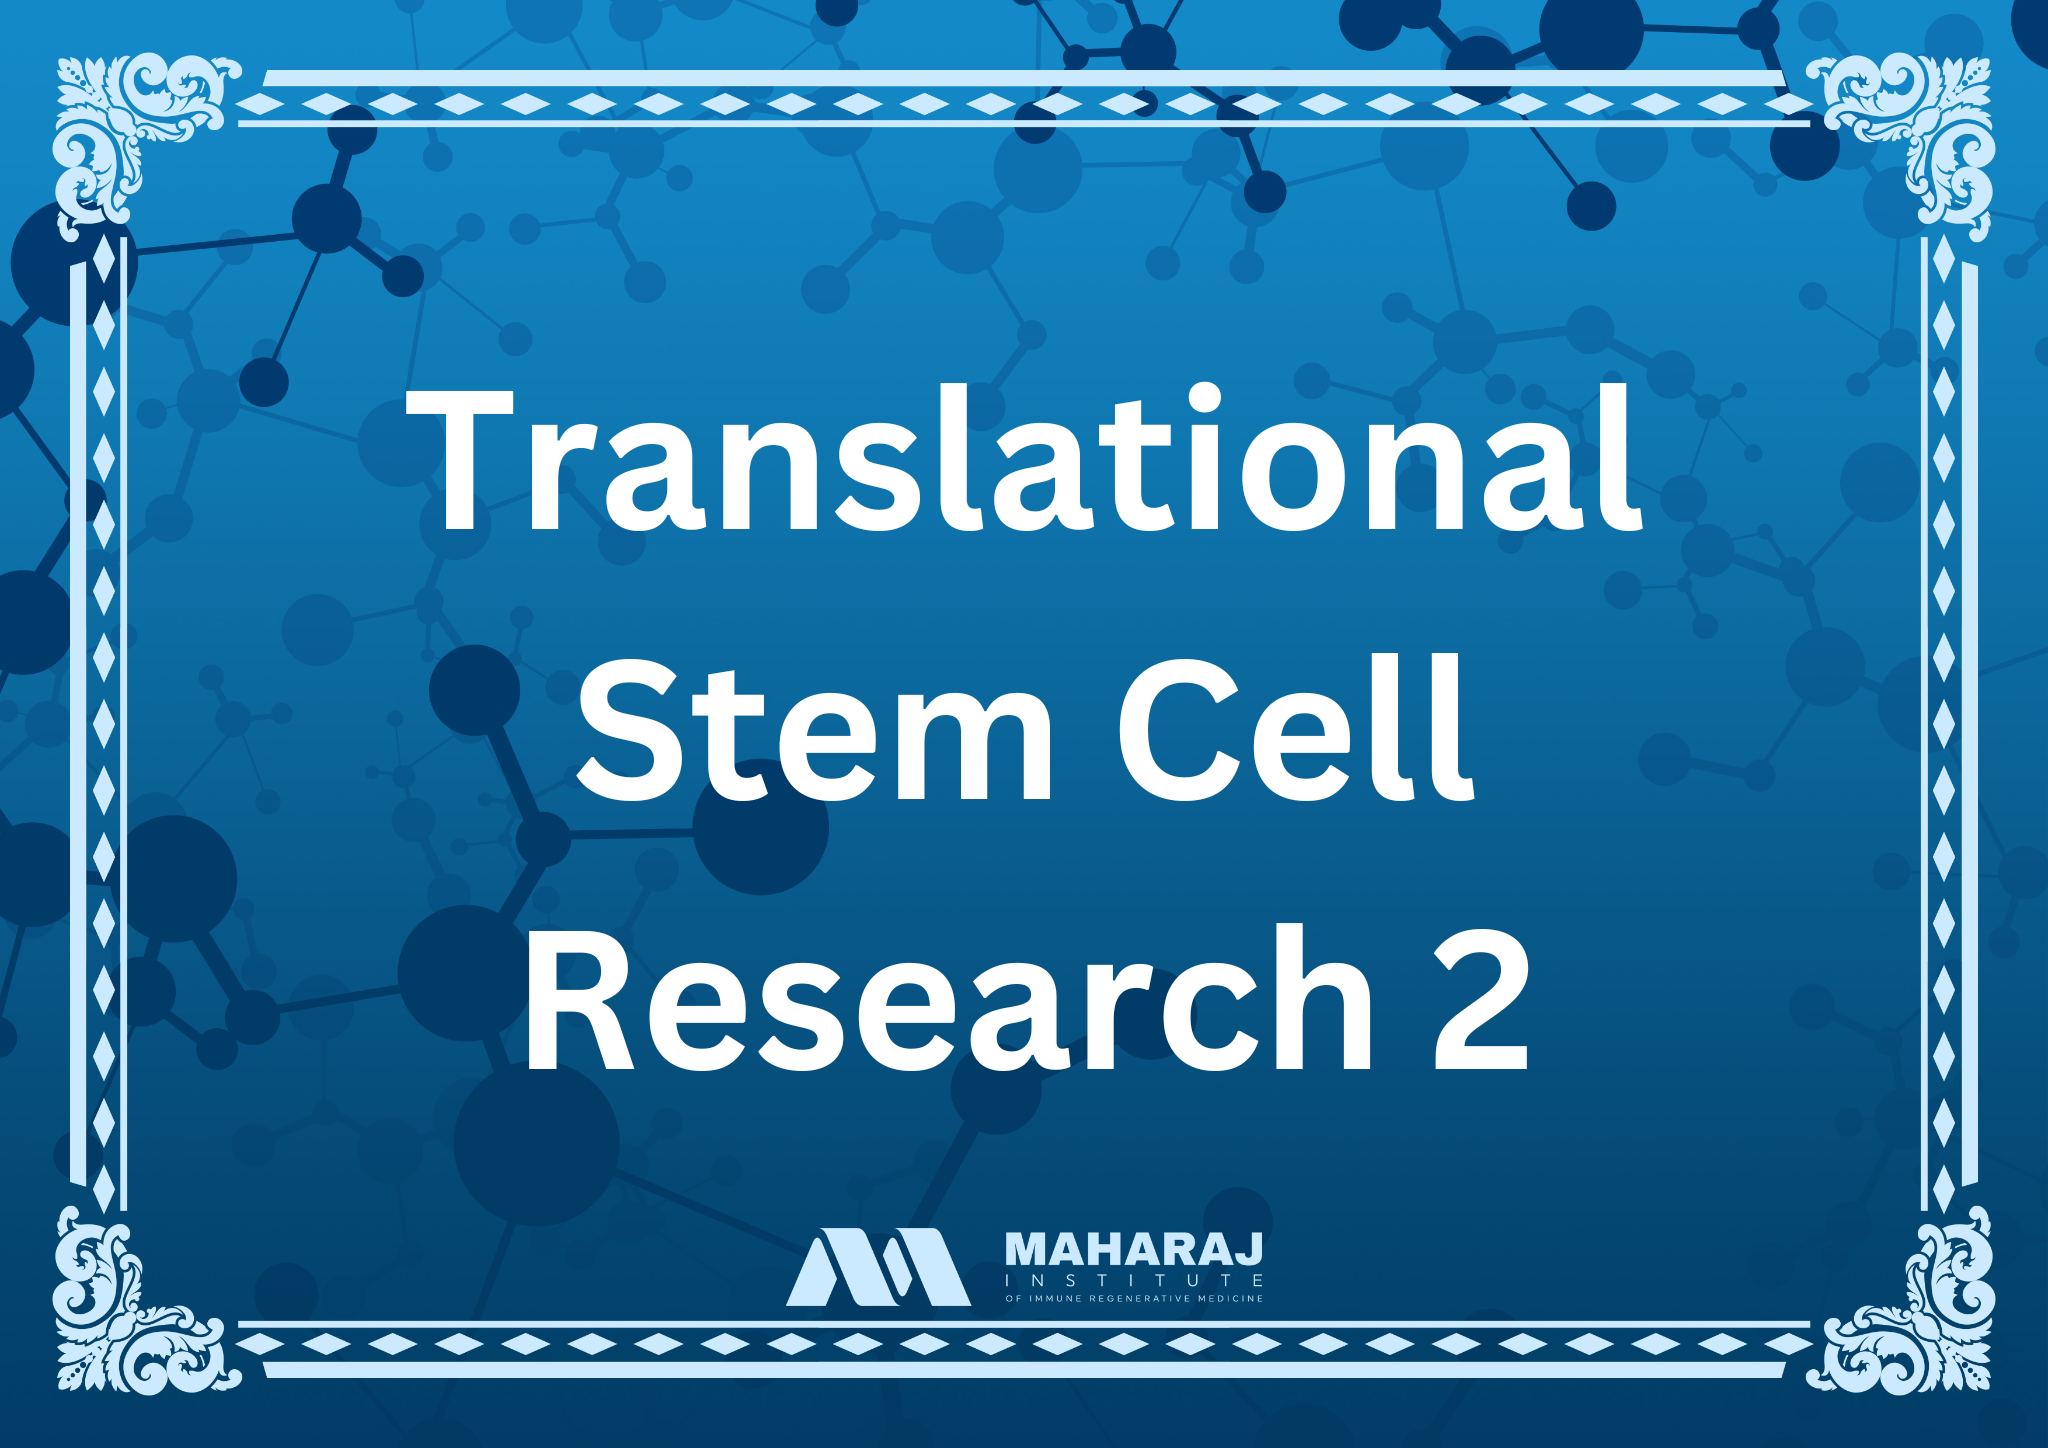 Translational Stem Cell Research 2